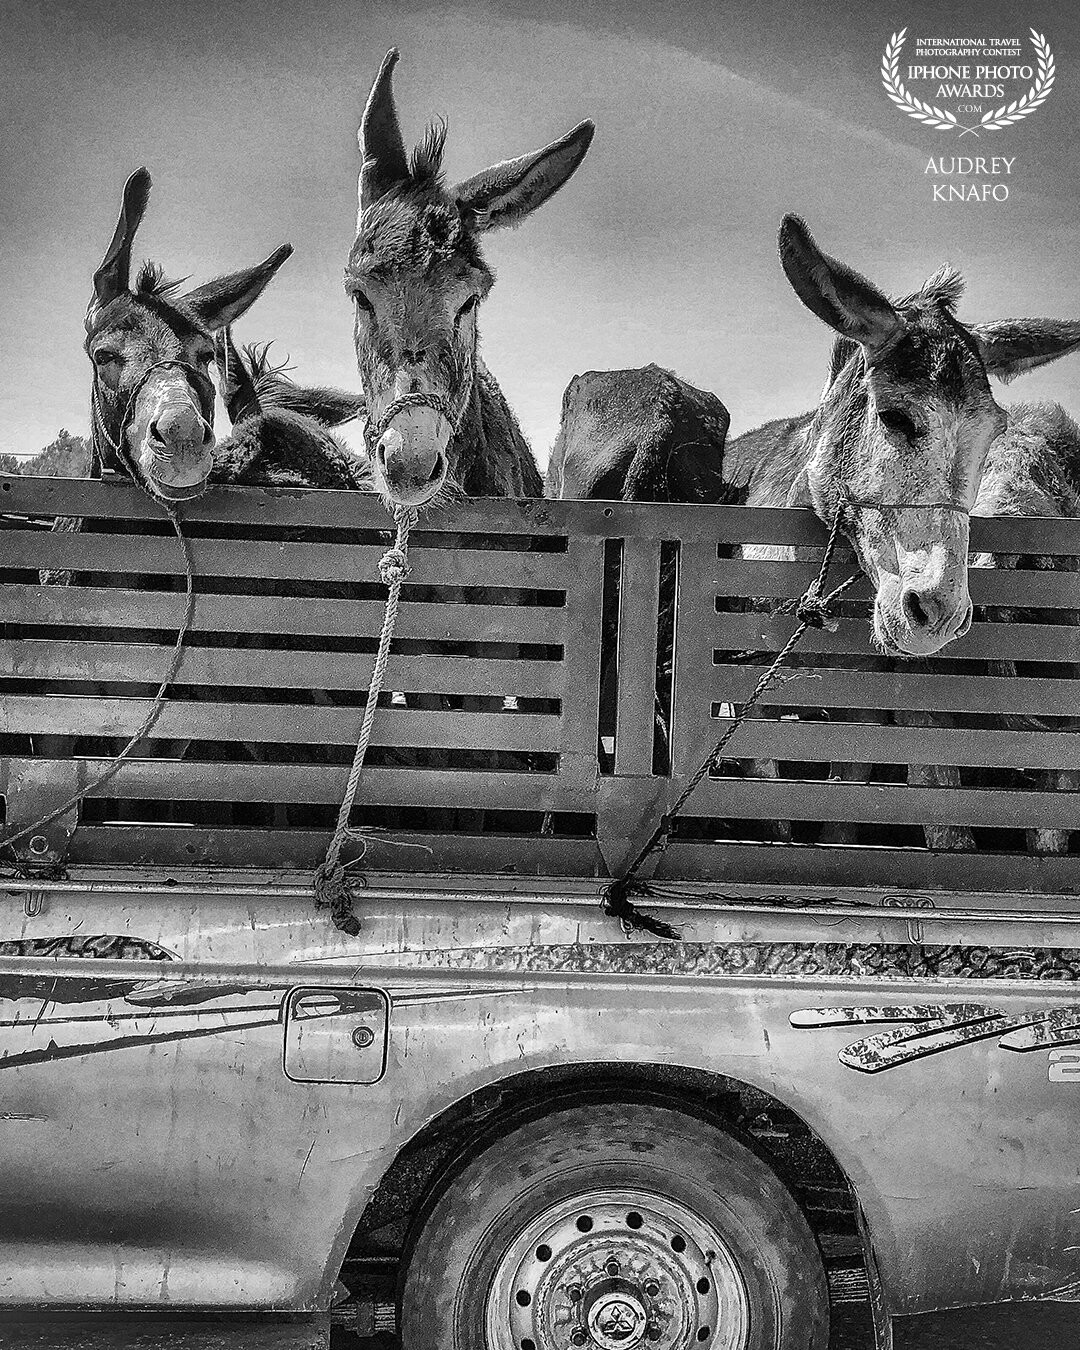 Désorganized Ears <br />
This pic was taken on the road from essaouira ( morocco ) to marrackech , i saw those donkeys in this truck . It was a very windy day plus the speed of the car , their ears were going in all direction . <br />
It was so funny . My friend was driving i had to ask him to Chase the truck and try to stand at the same level . It was not a highway and cars were coming in our direction . But i did it and here it is !